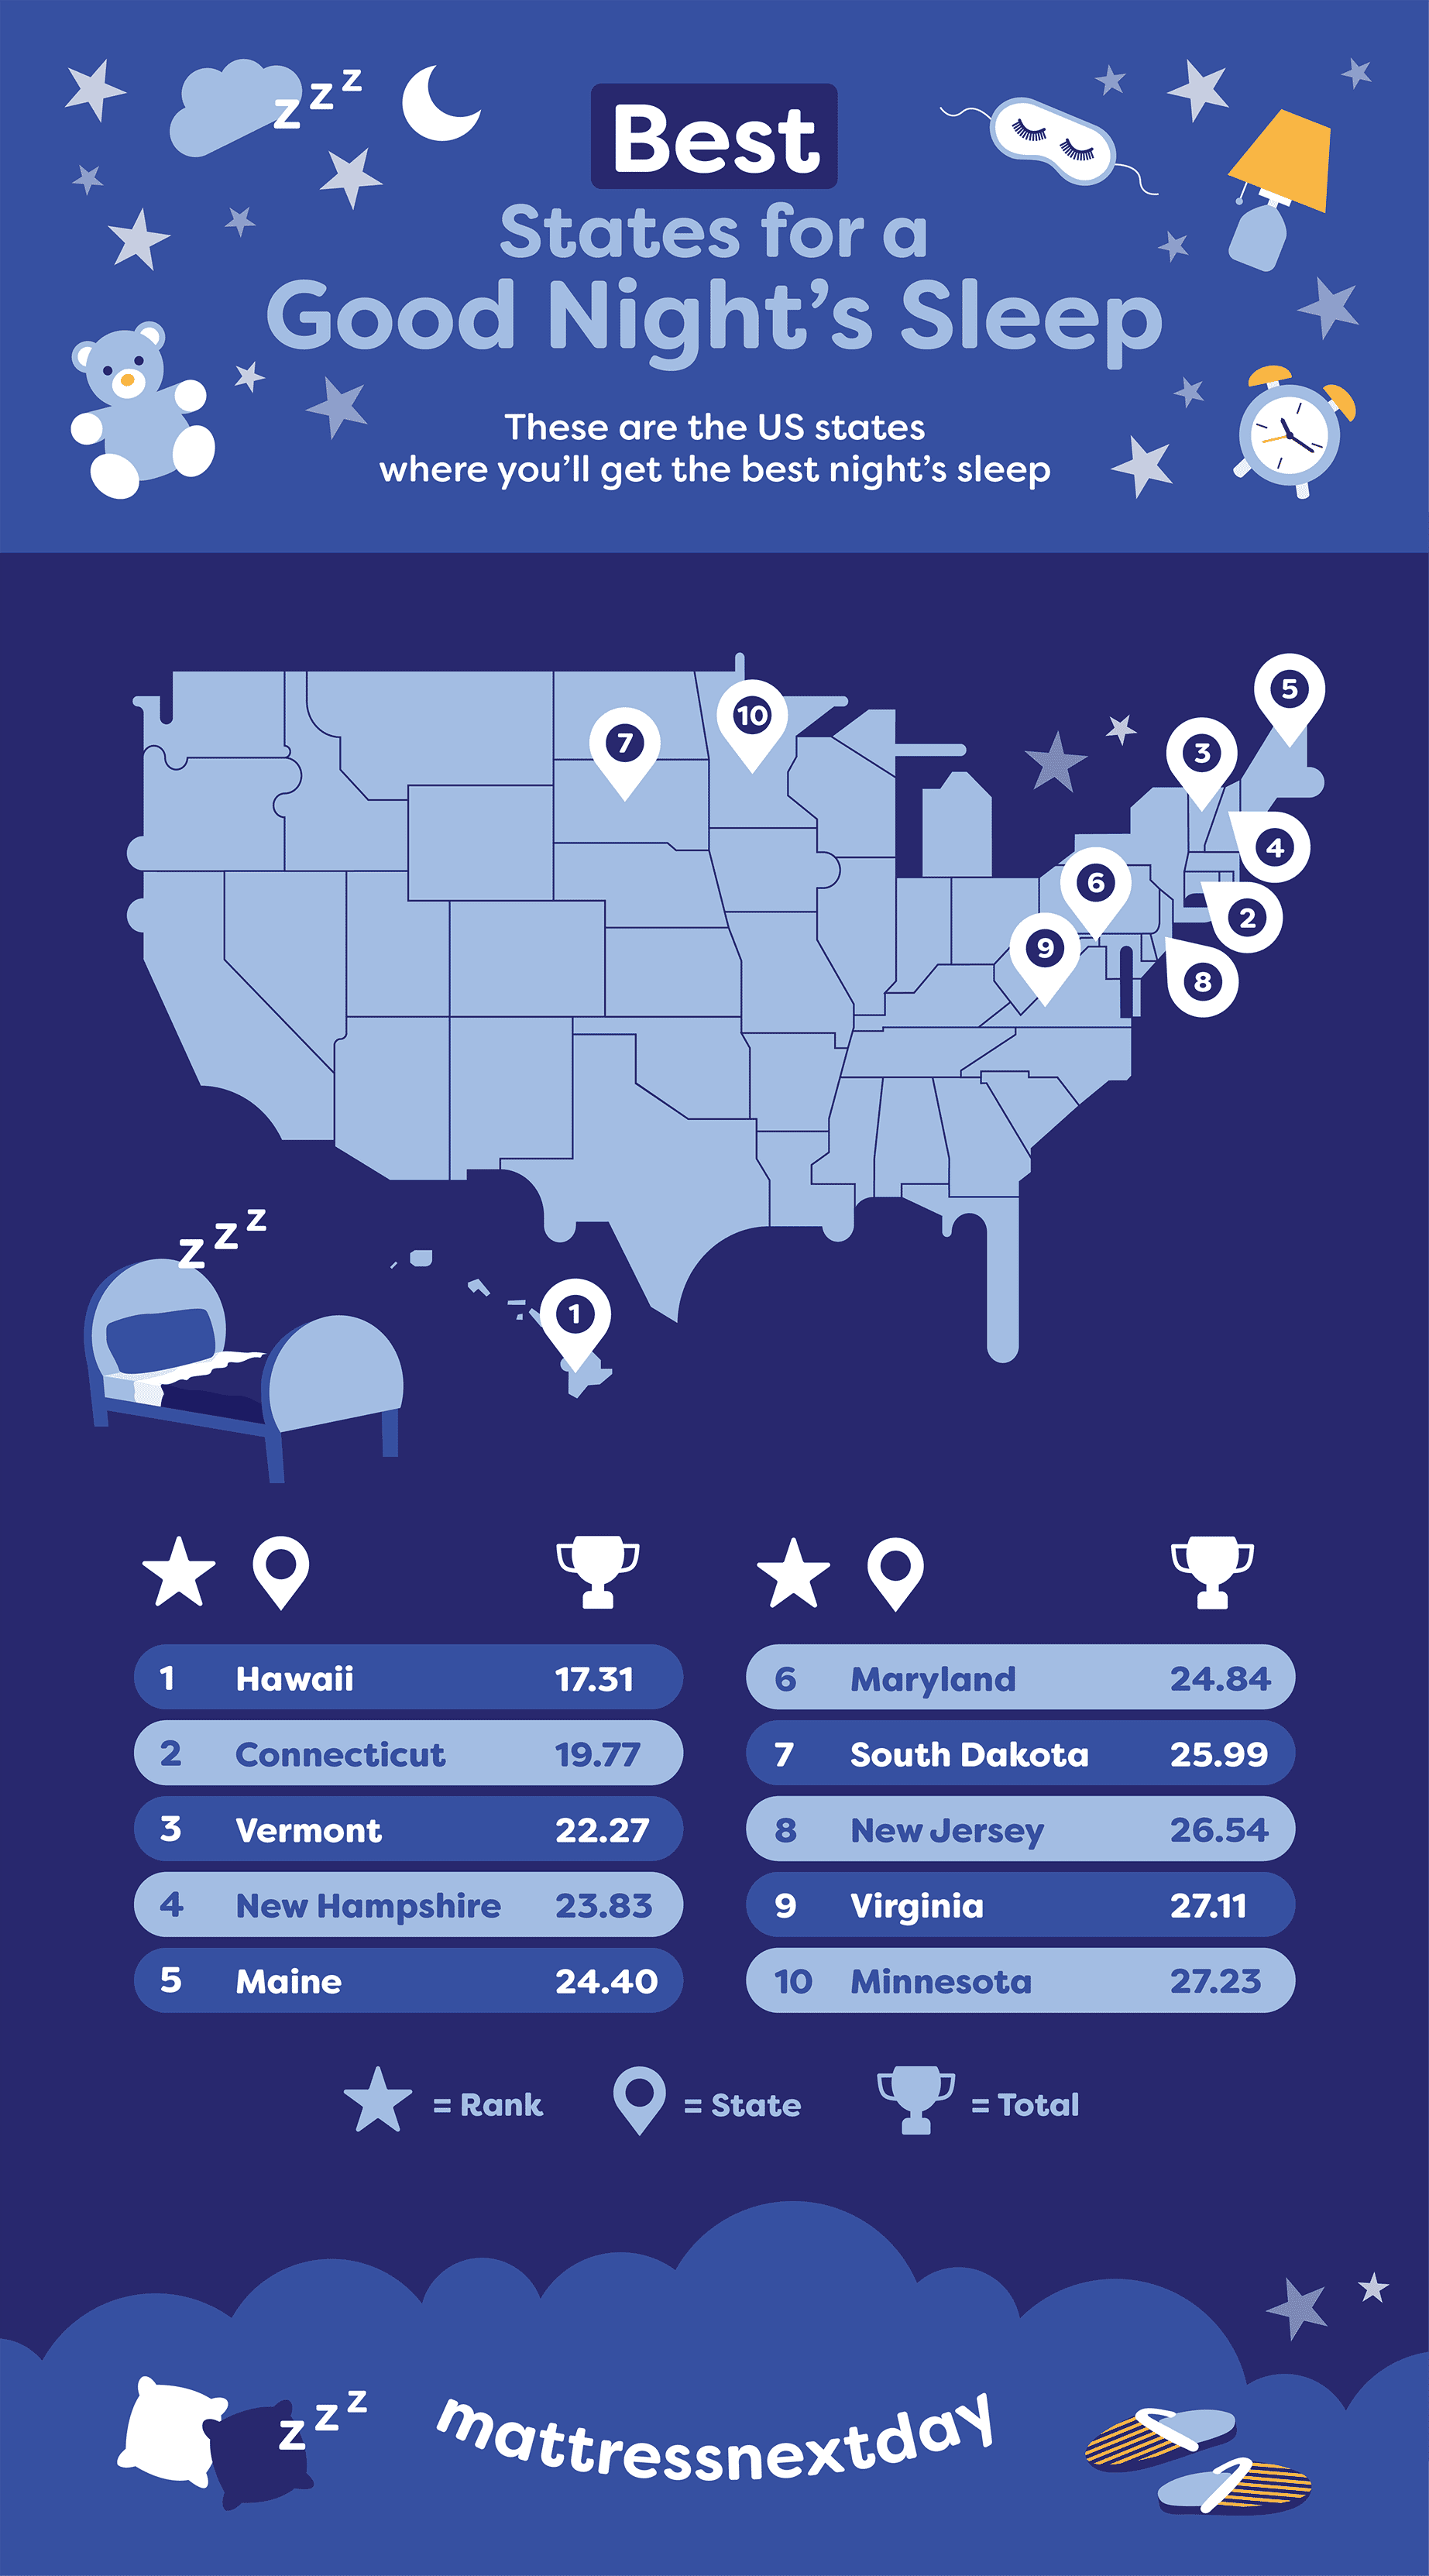 Infographic depicting the best states for a good night's sleep.